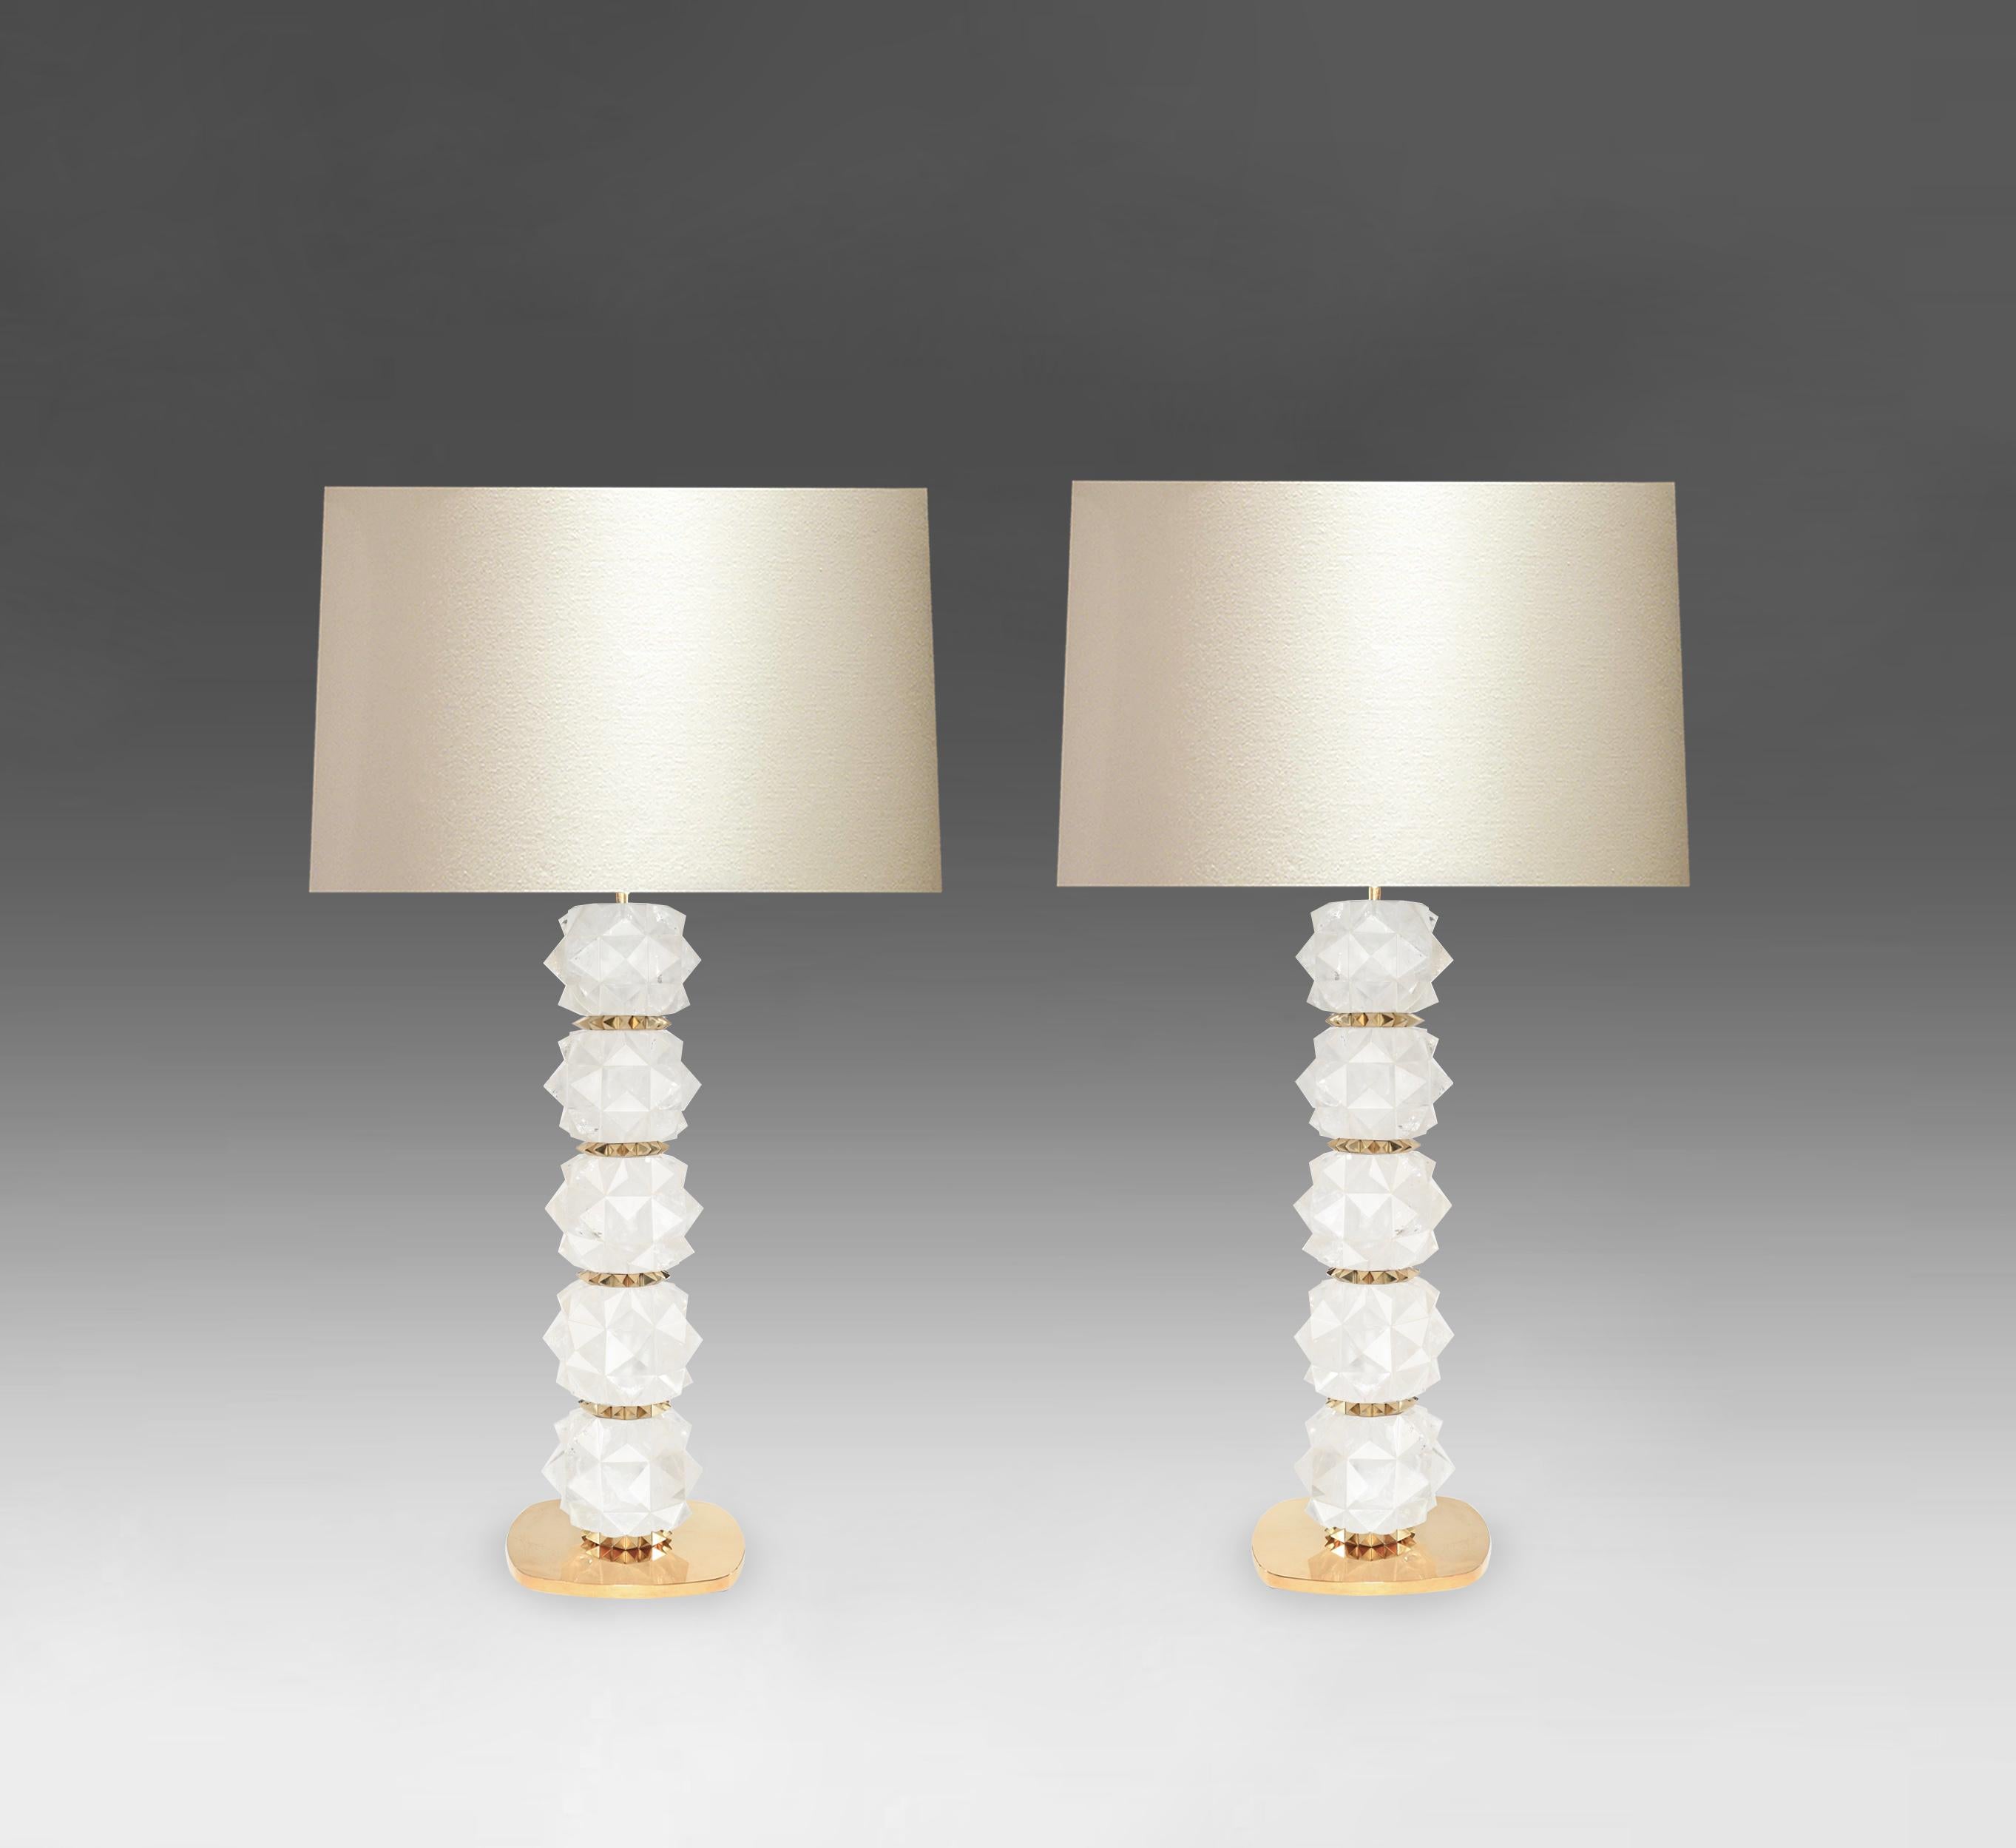 Pair of fine carved faceted rock crystal lamps with polished brass decoration. Created by Phoenix Gallery, NYC.
To the top of rock crystal: 20.5